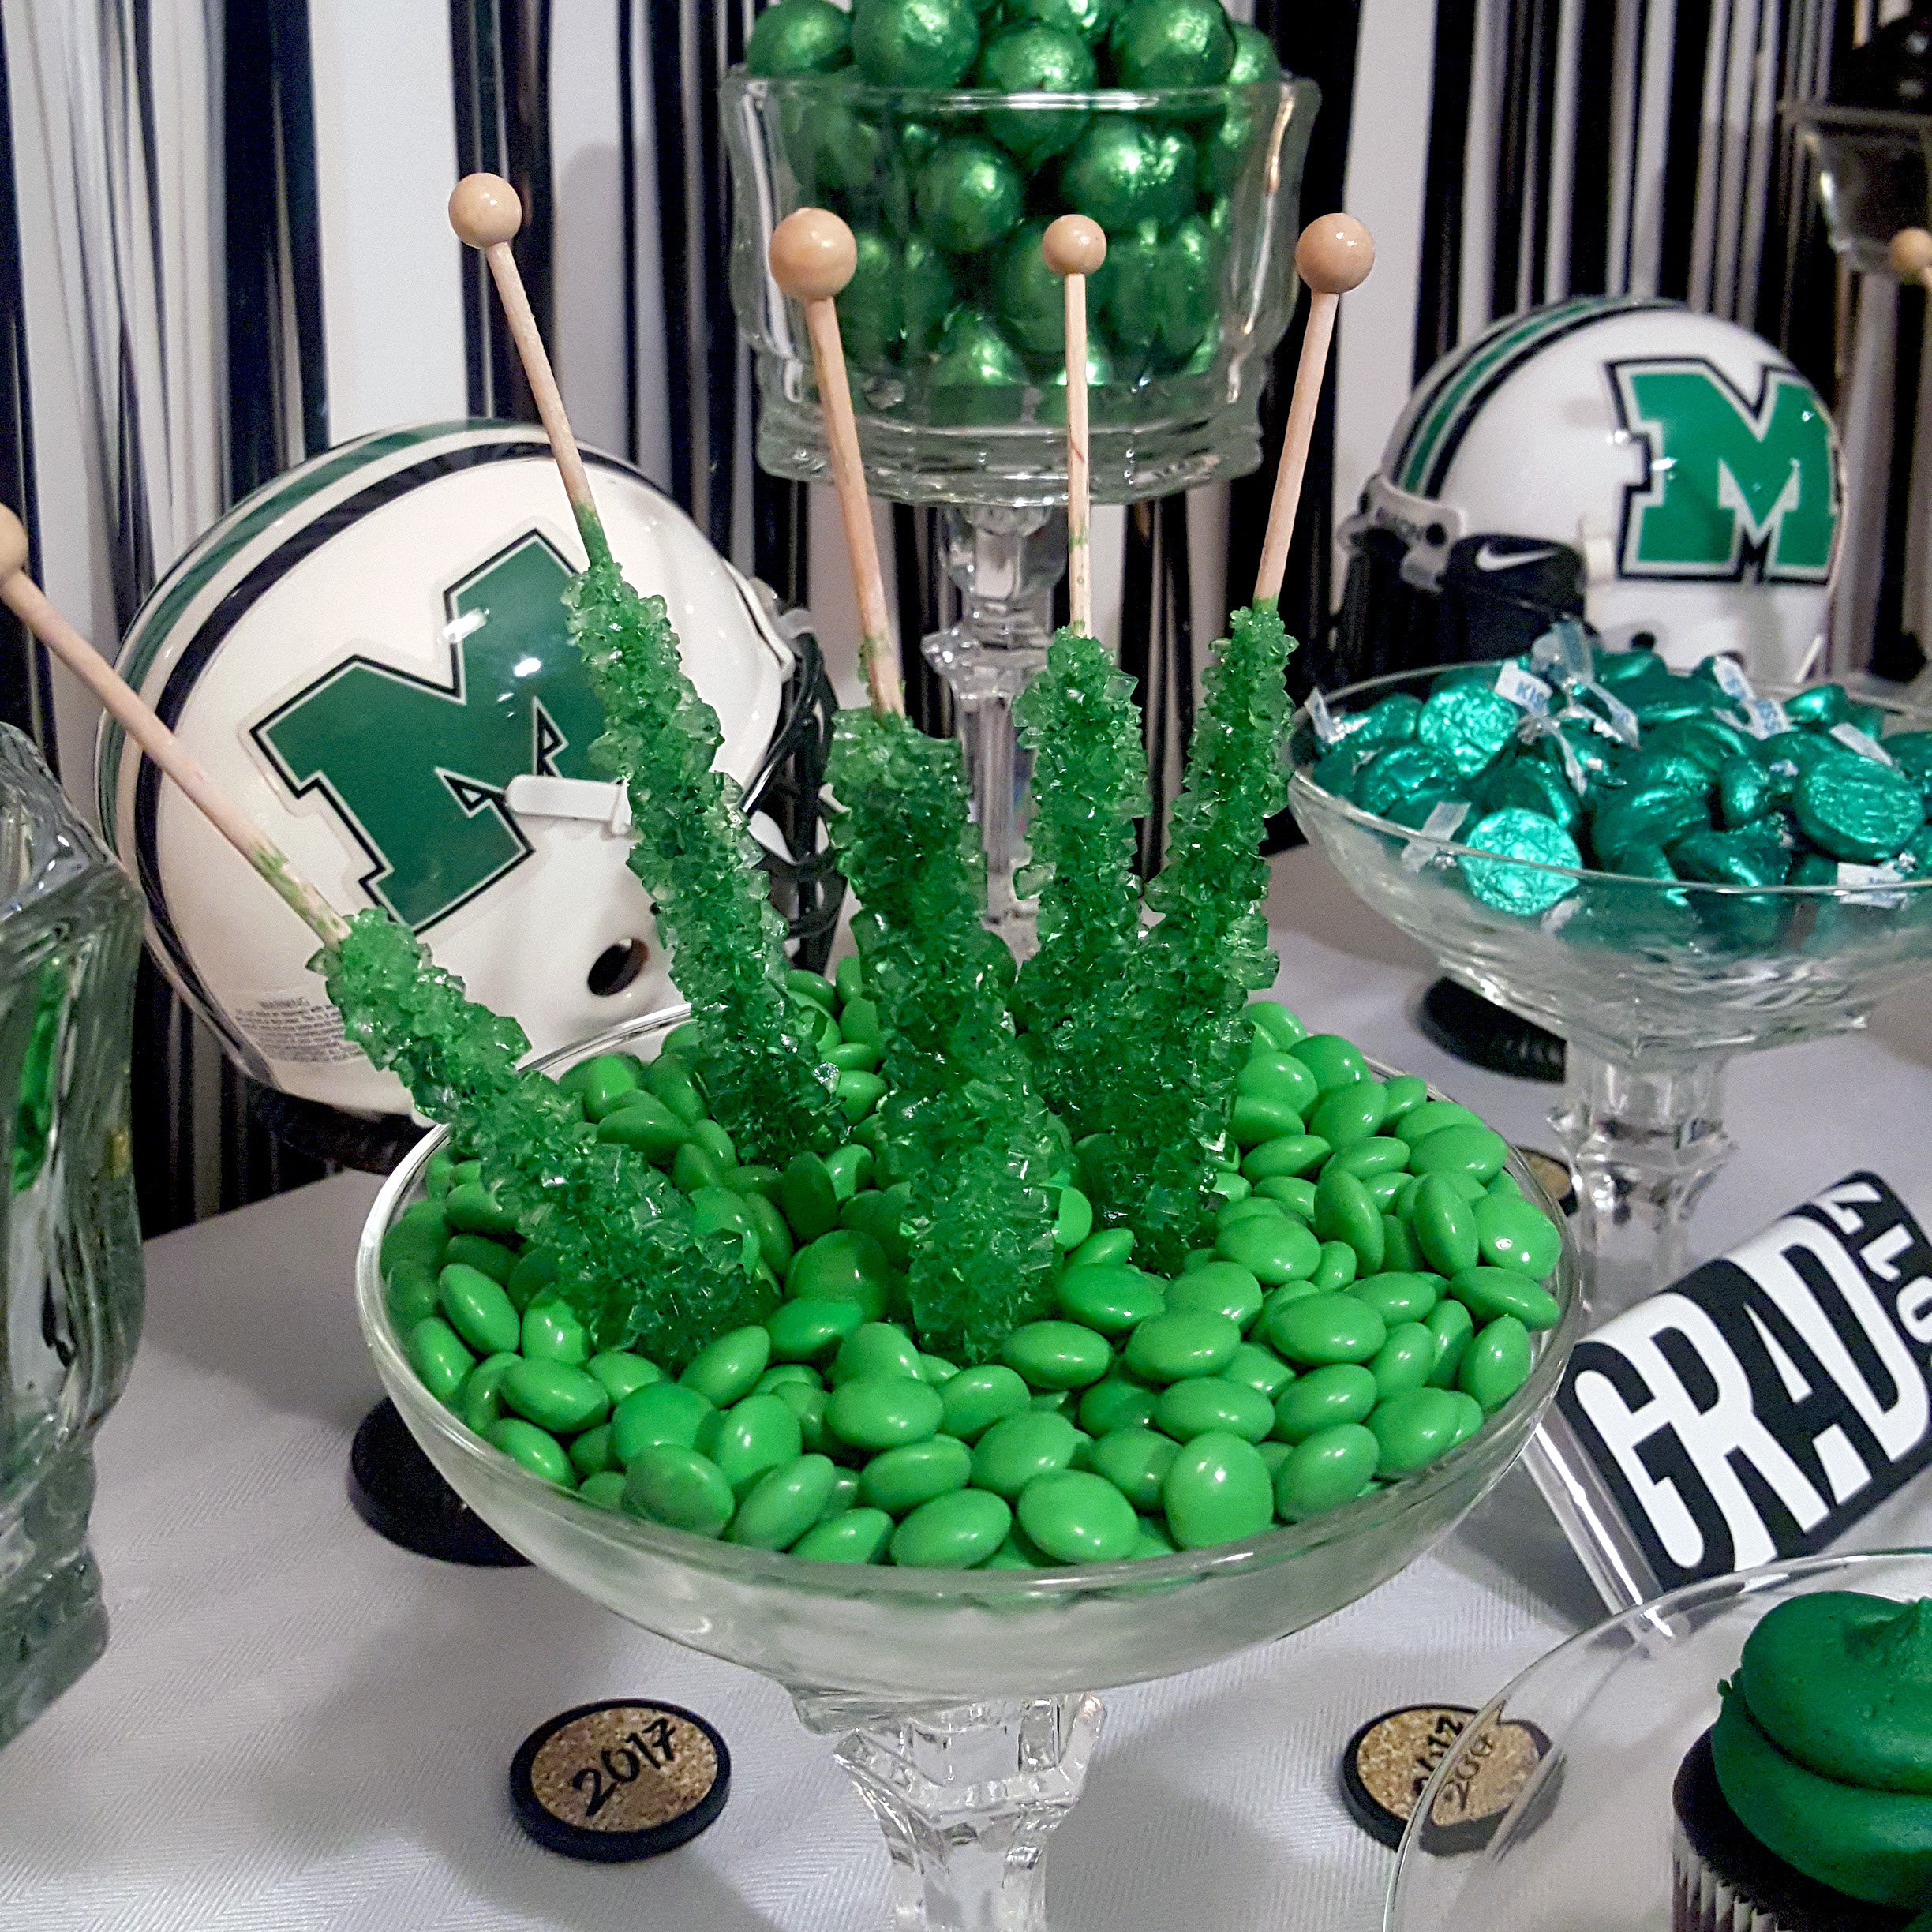 Graduation Party Candy Ideas
 Green Black & White Graduation Party and Favor Ideas